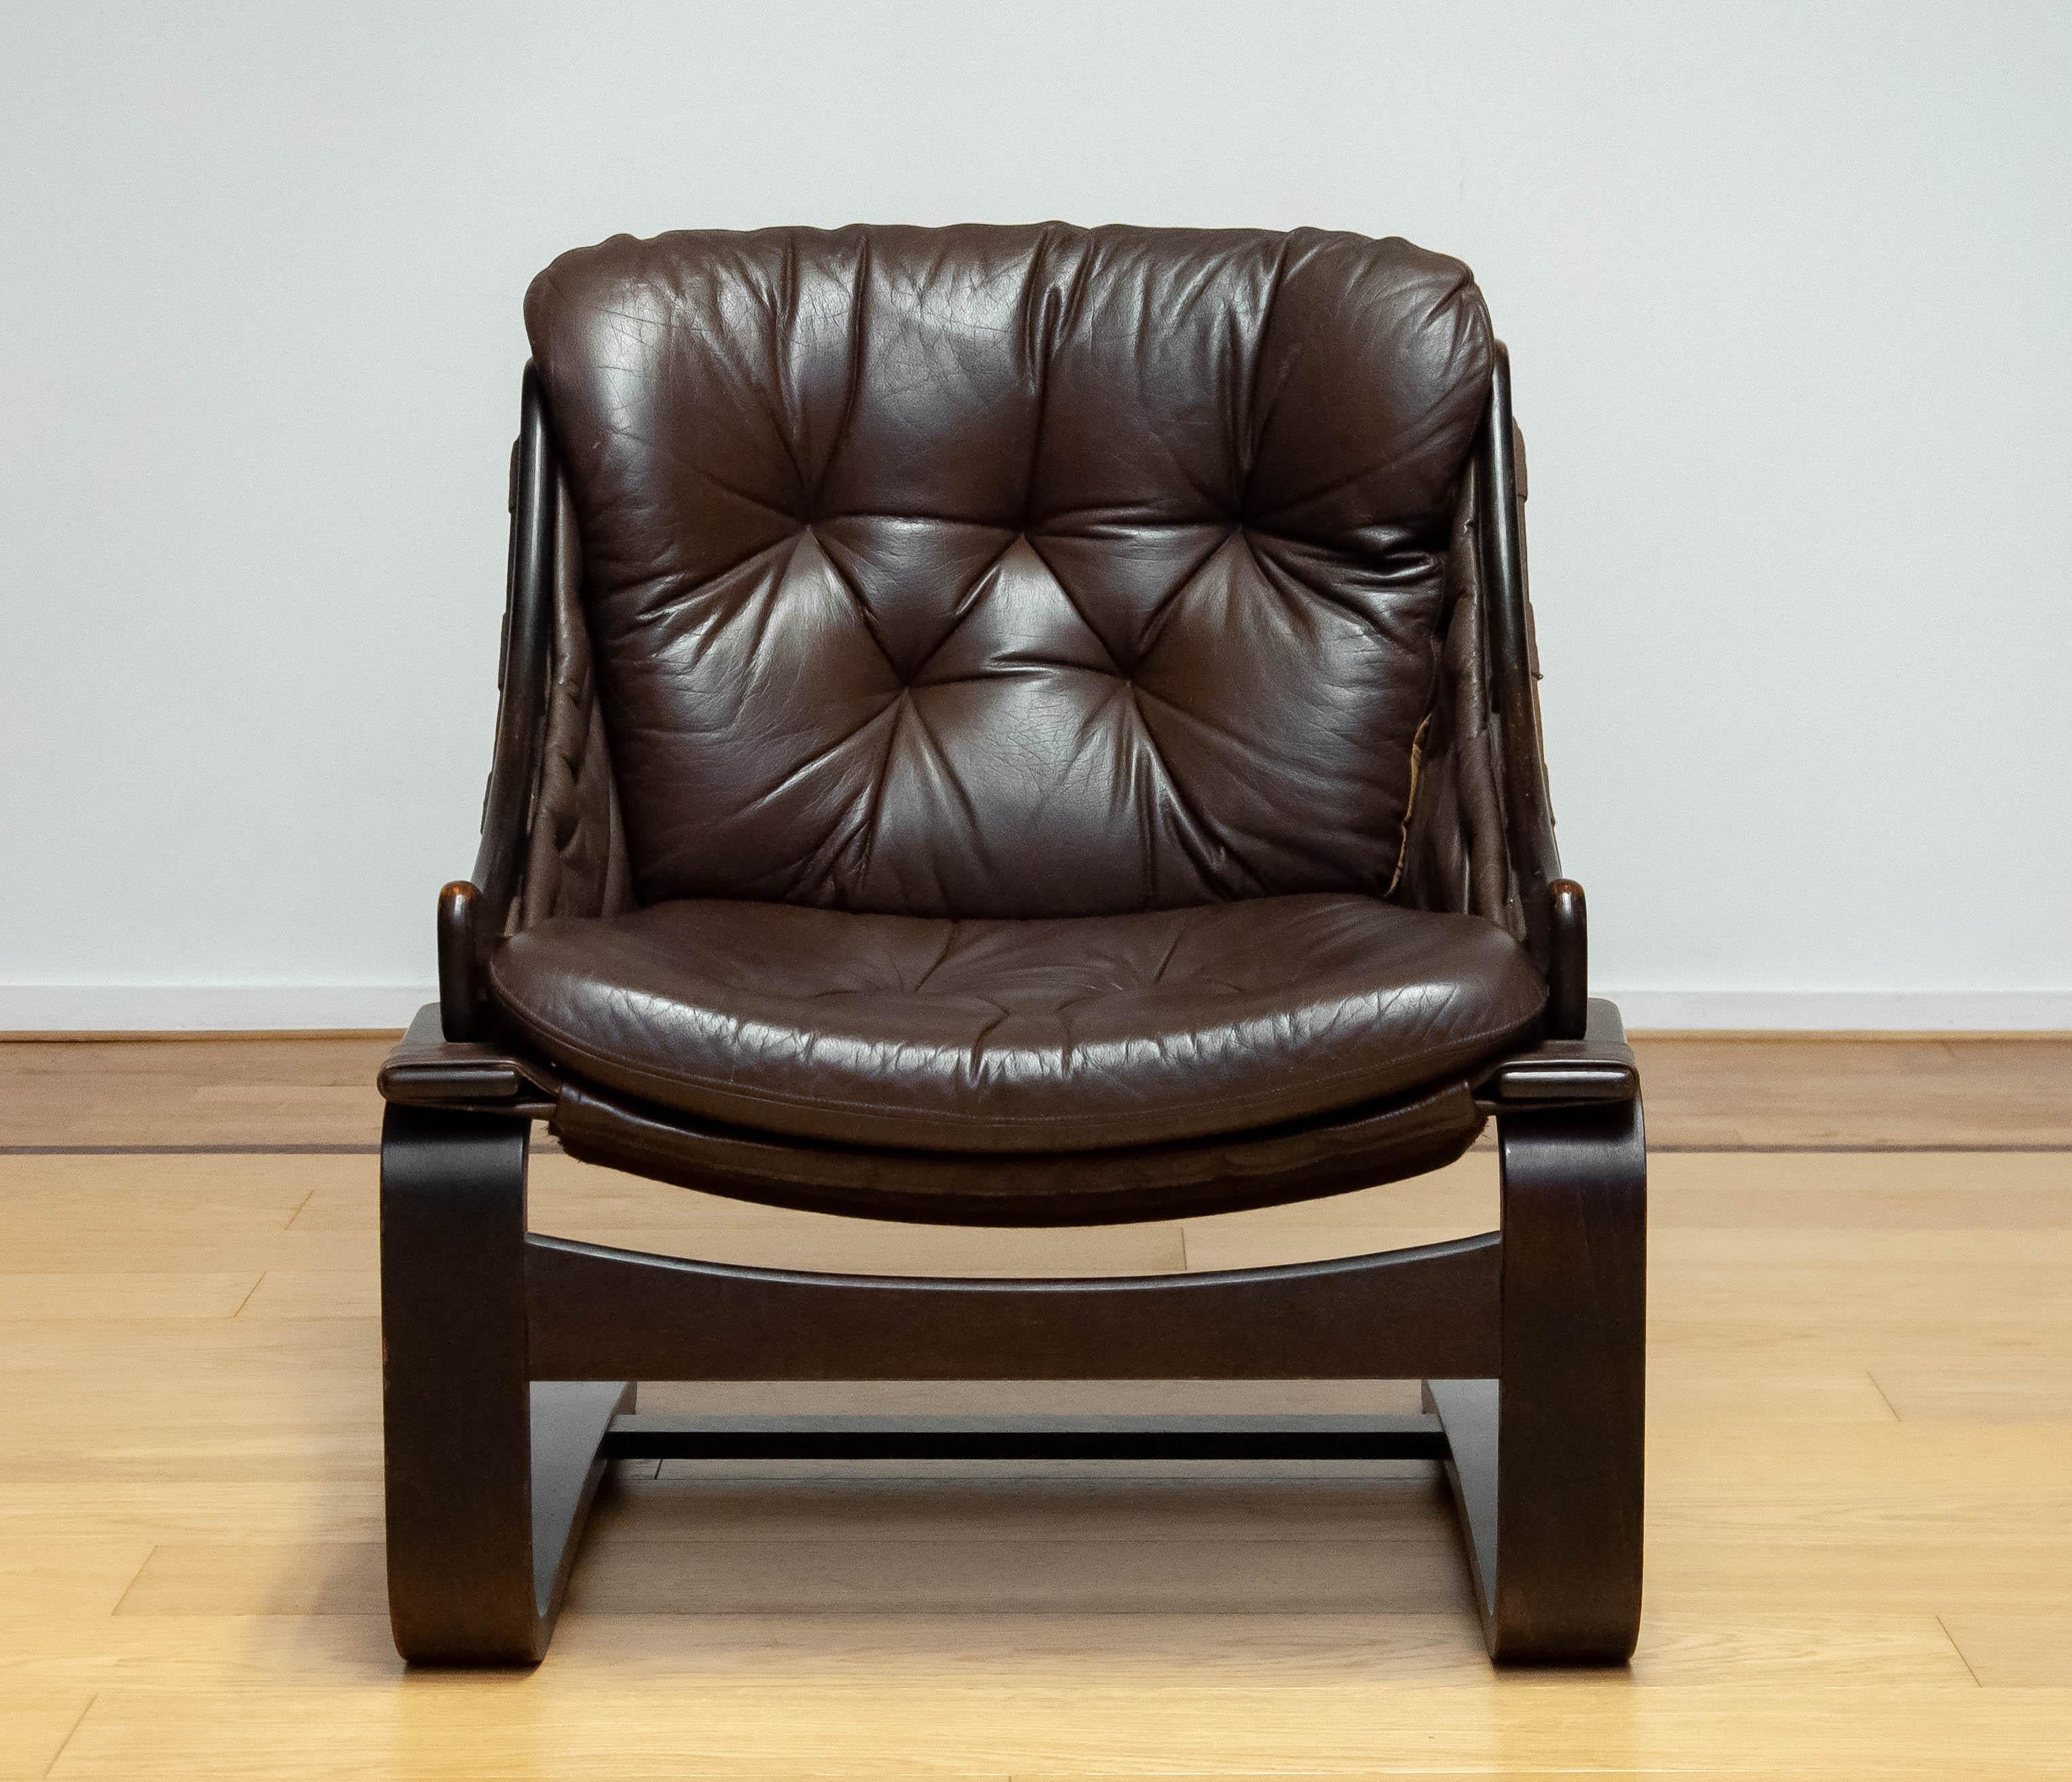 1970s Brown Leather Lounge Chair Model 'Krona' By Ake Fribytter For Nelo, Sweden For Sale 5